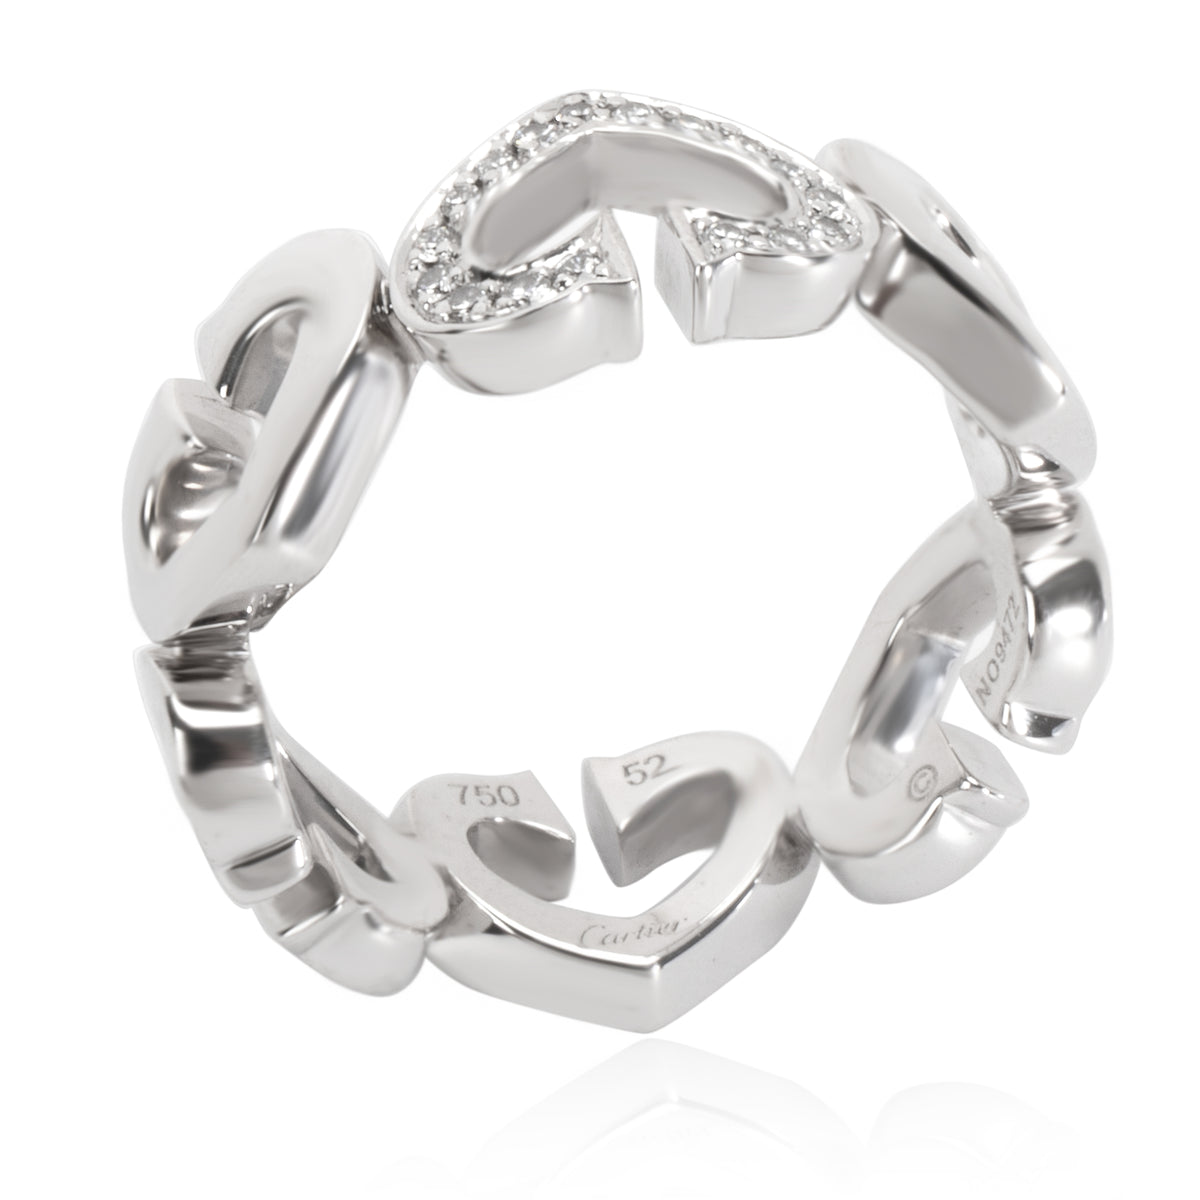 Cartier C Hearts Diamond Ring in 18K White Gold (Size 52) 0.10 ctw